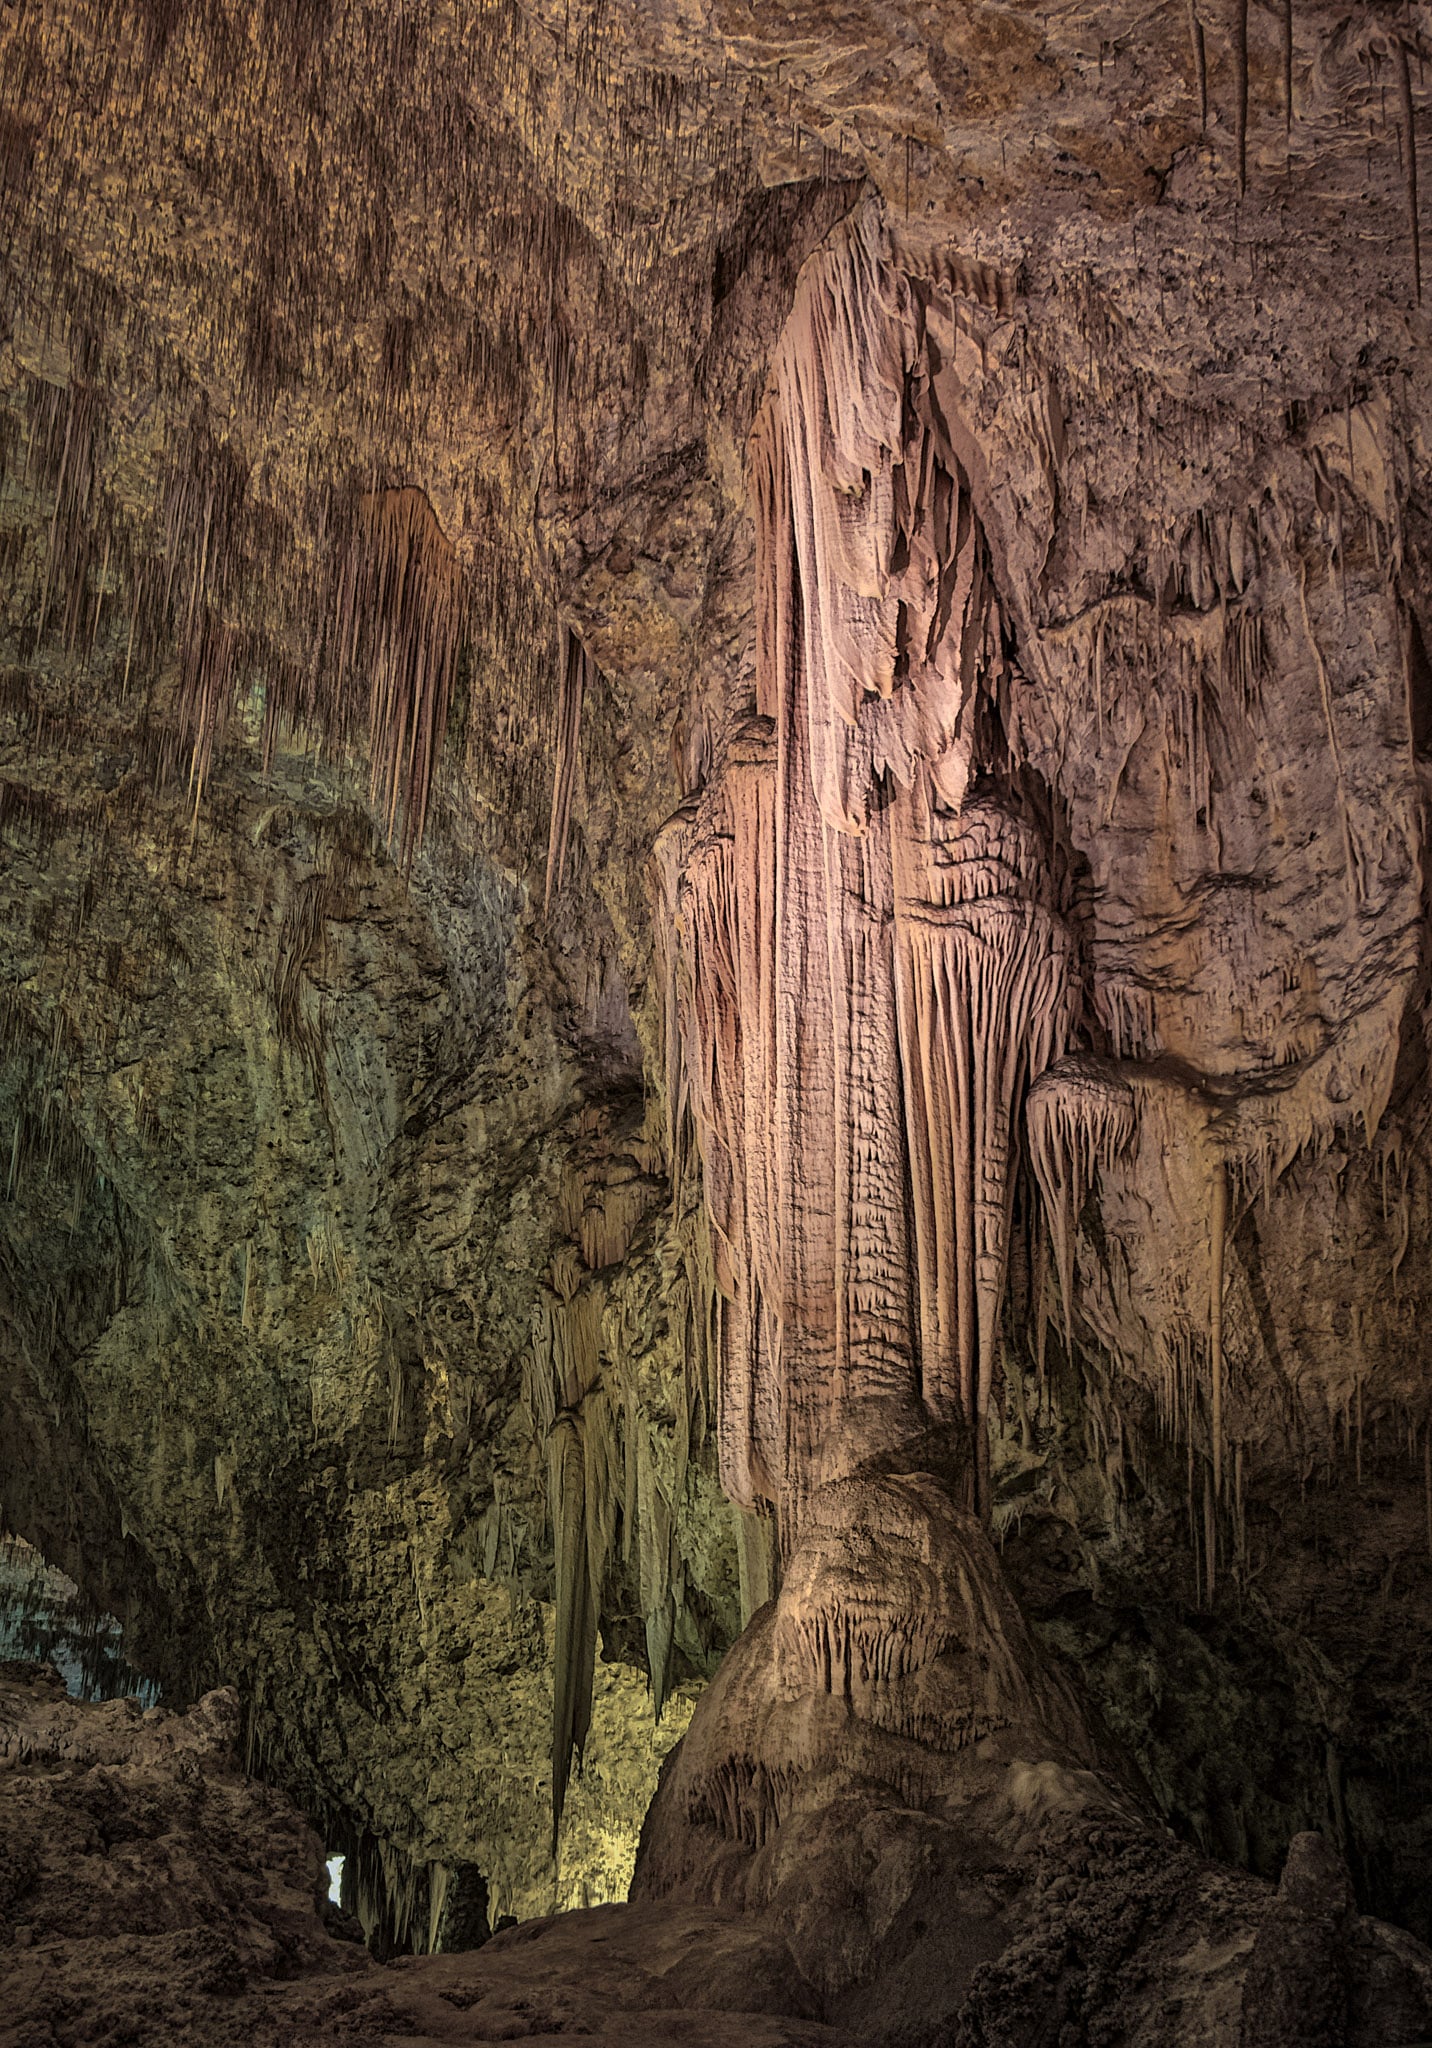 Draperies create the illusion of a wraith in the Big Room area of Carlsbad Caverns National Park, New Mexico.